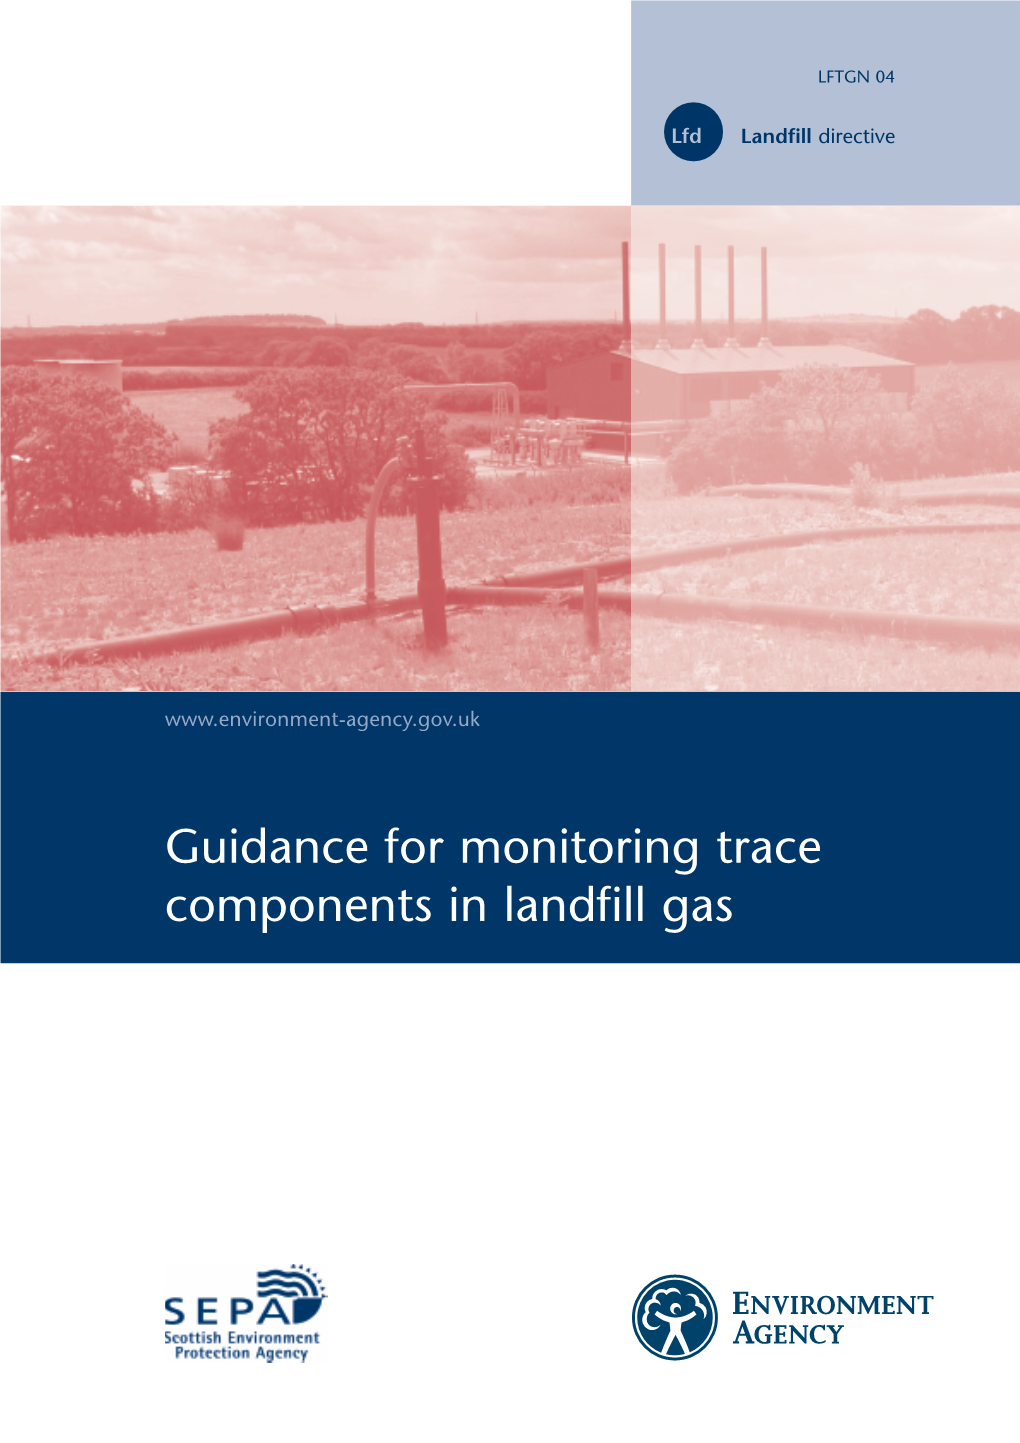 Guidance for Monitoring of Trace Components in Landfill